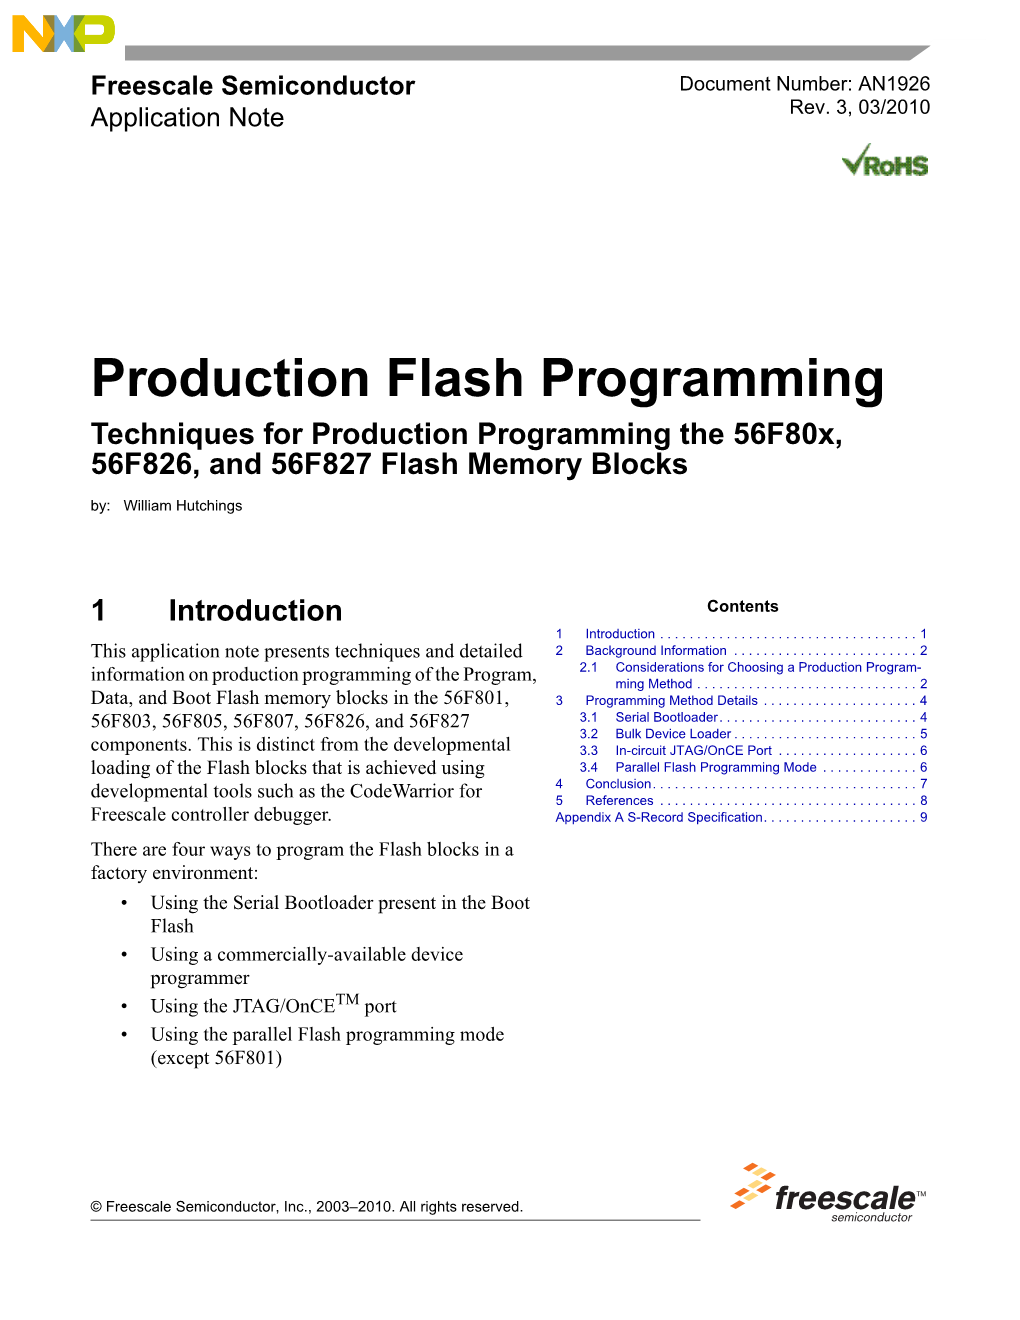 Production Flash Programming for 56F800